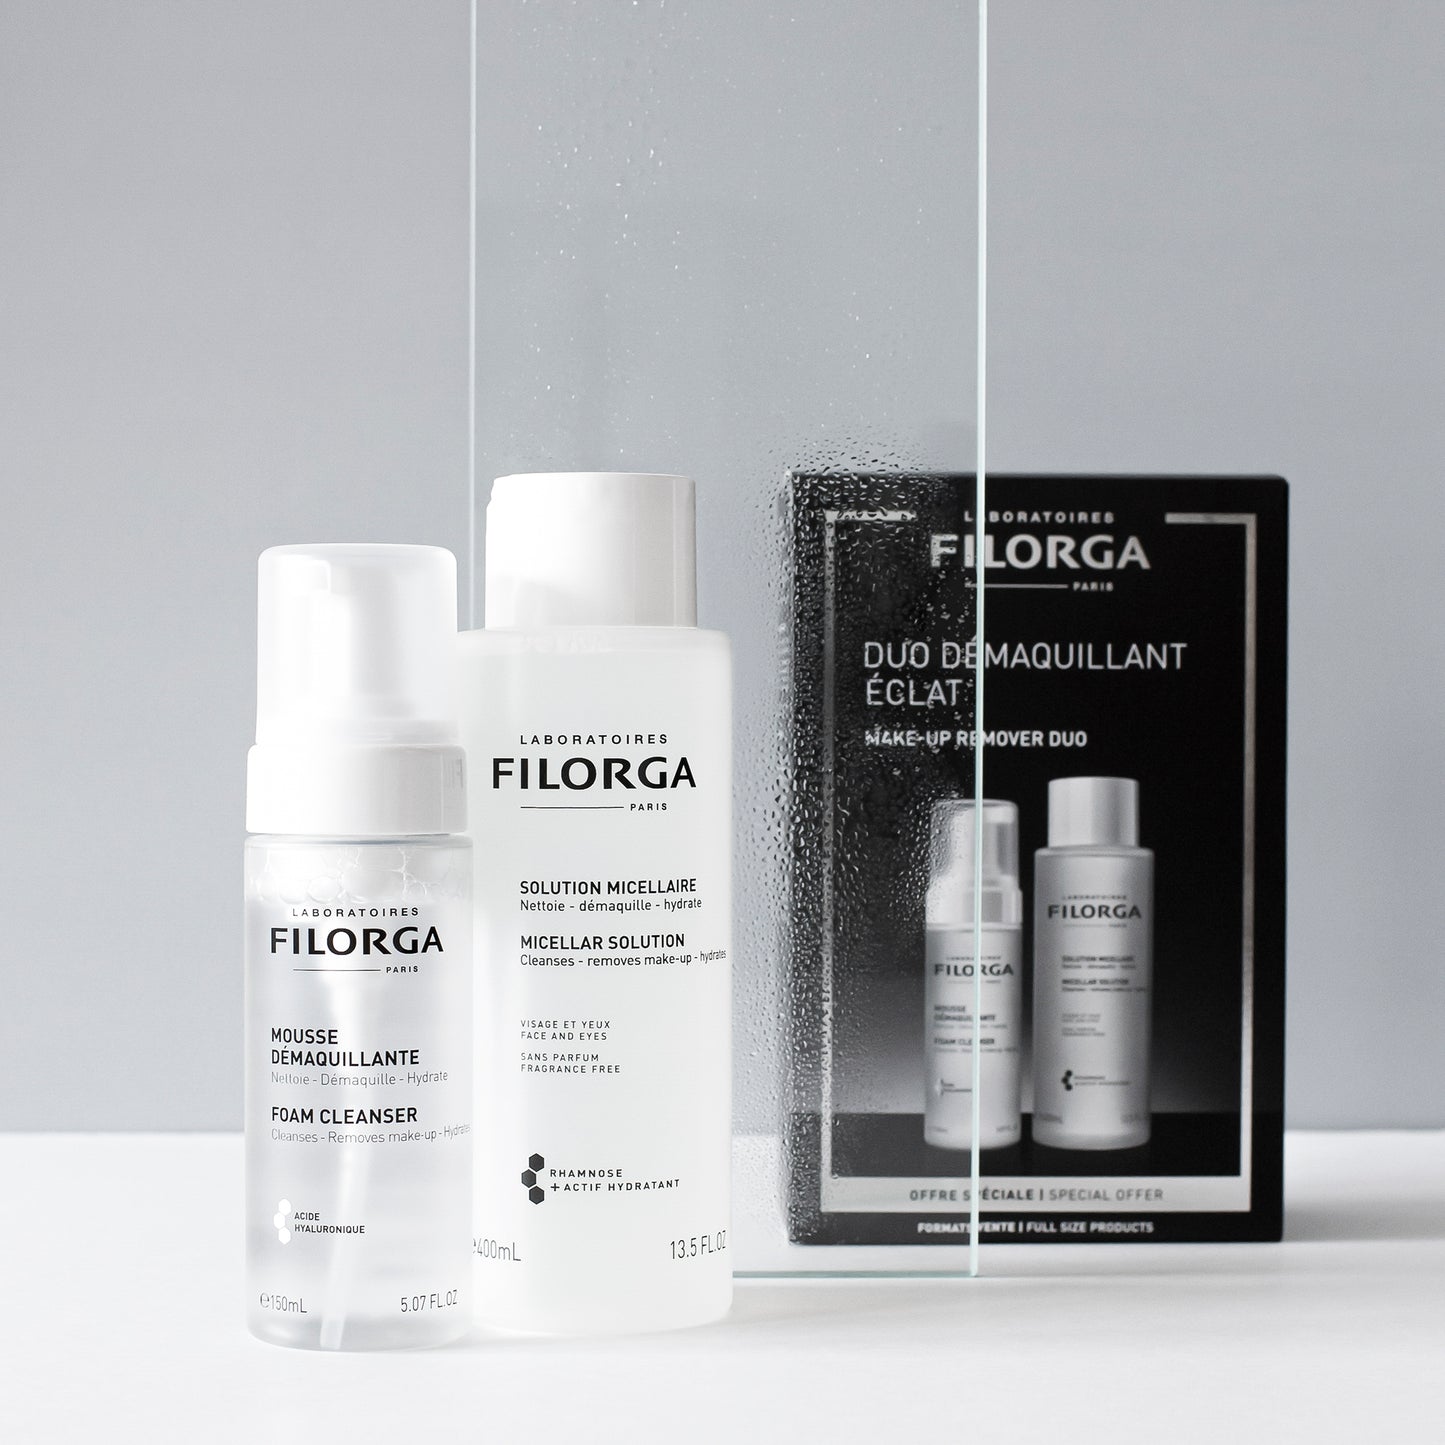 FILORGA CLEANSING DUO bottles with box next to steamed glass panel